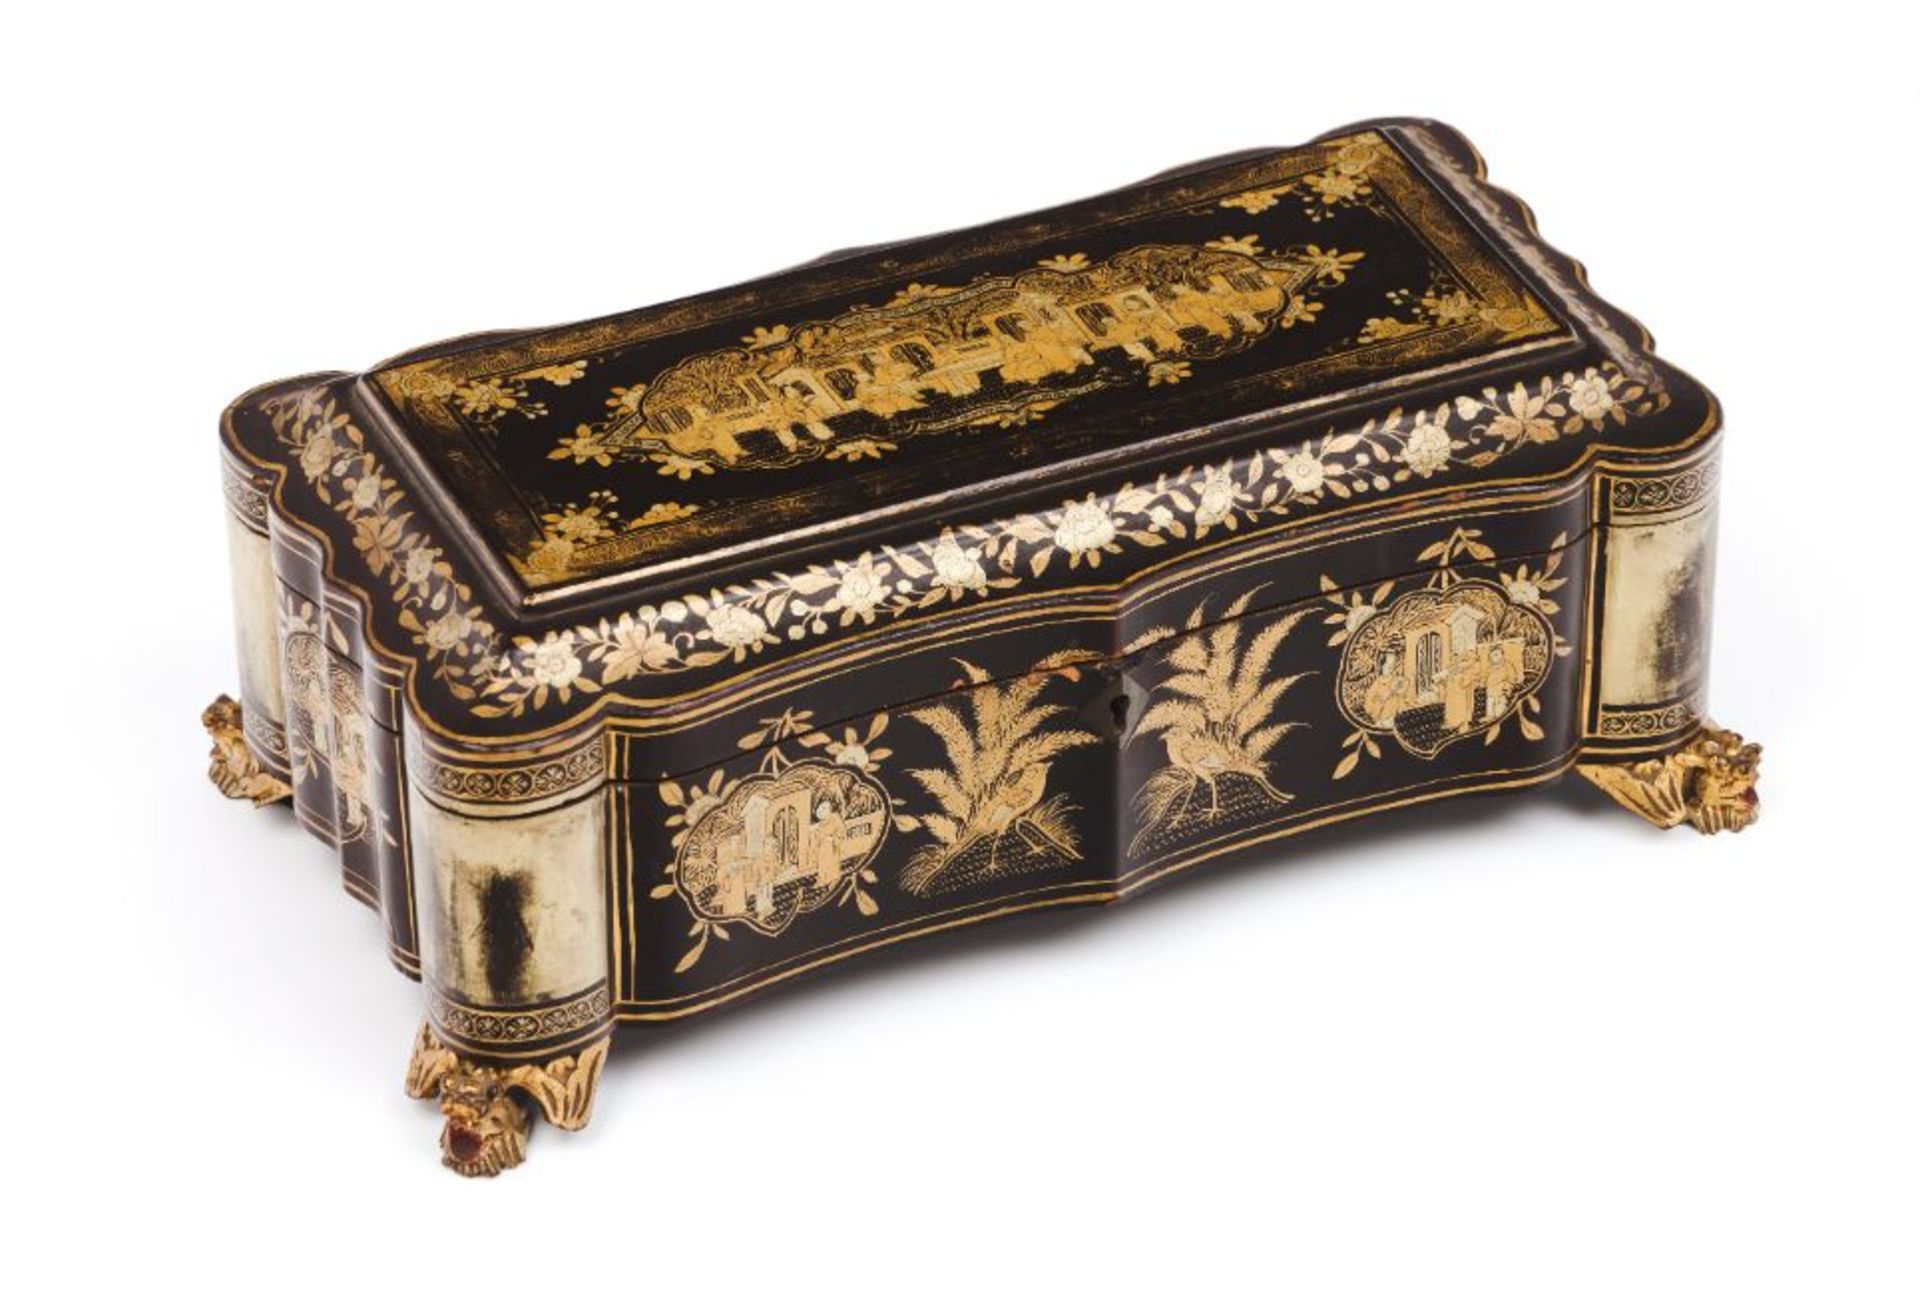 A games boxBrown japanned wood Gilt decoration with floral motifs and cartouches of landscapes